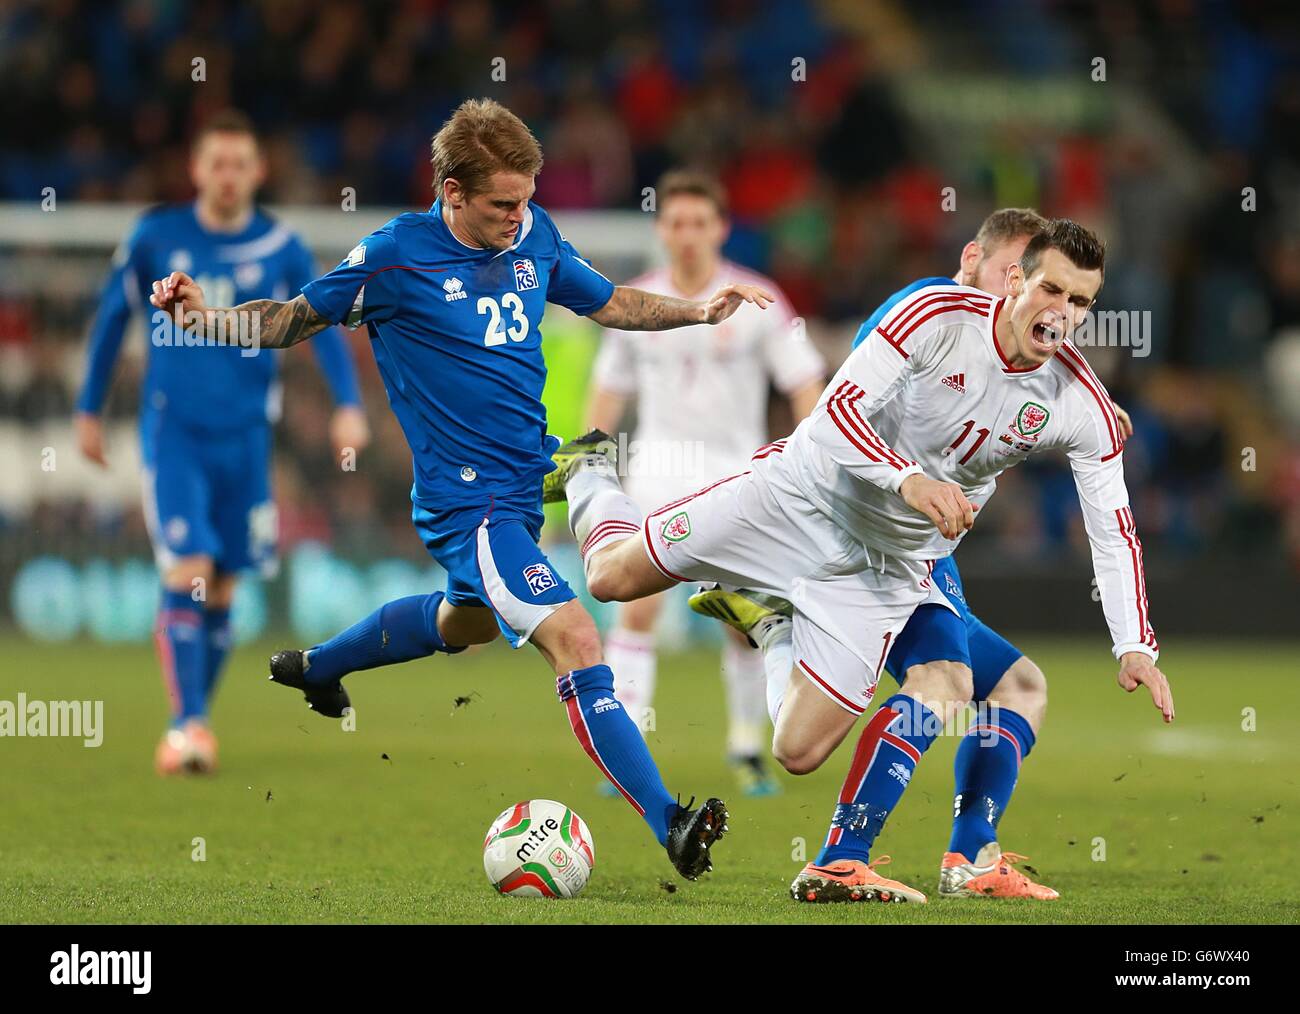 Soccer - International Friendly - Wales v Iceland - Cardiff City Stadium. Wales' Gareth Bale (centre) is tripped whilst taking on Iceland's Ari Freyr Skulason (left) and Aron Gunnarsson (right) Stock Photo